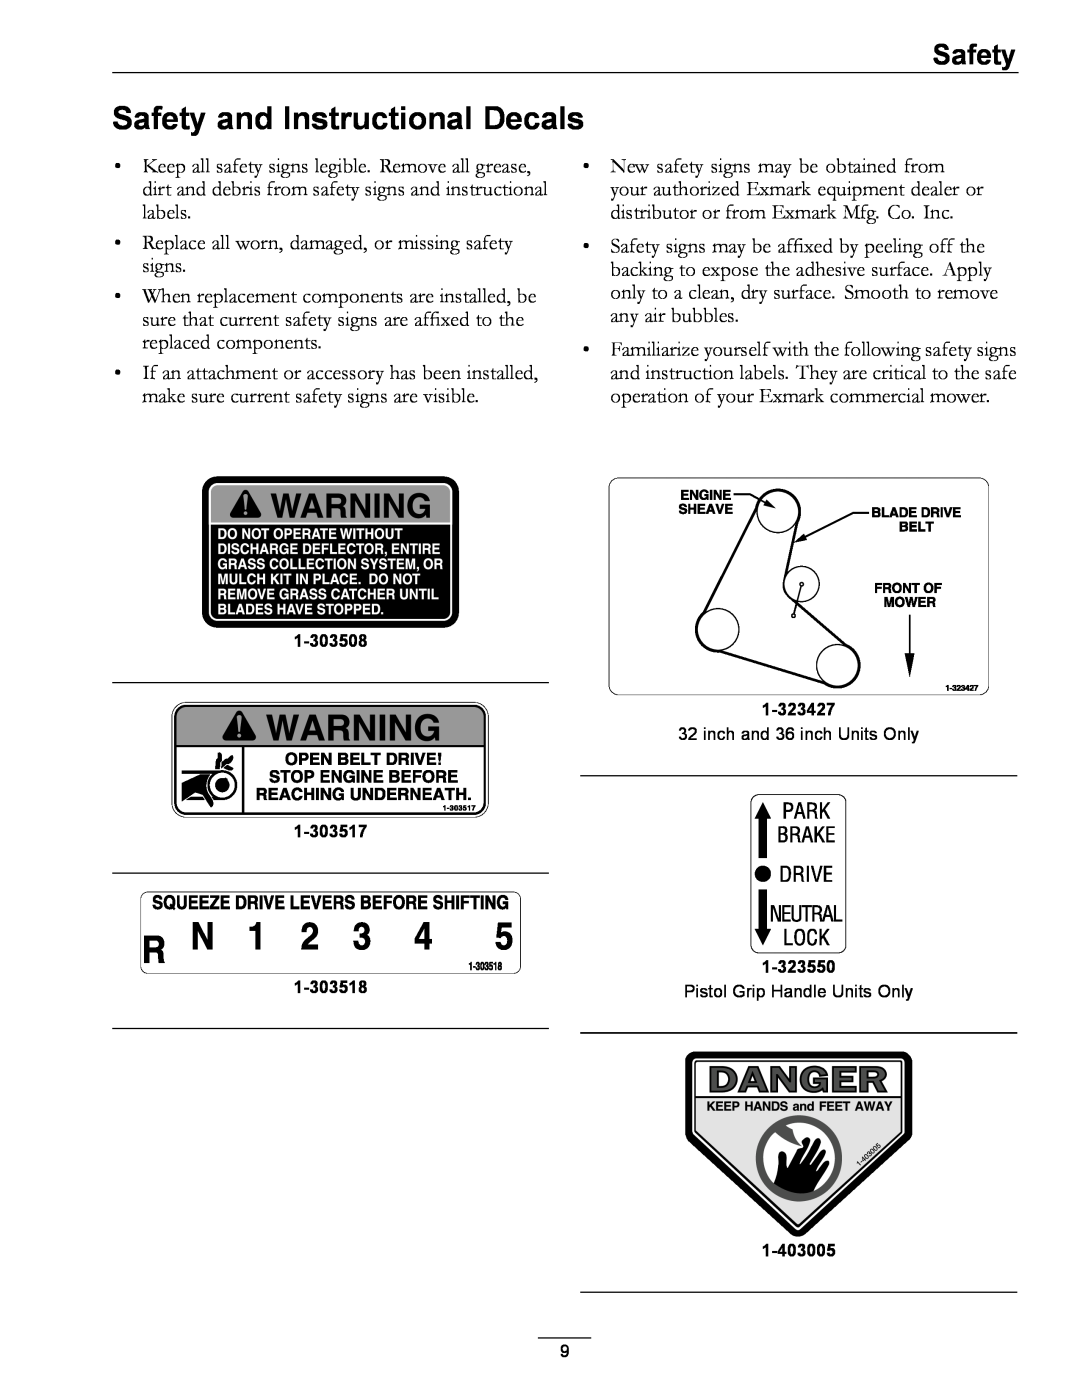 Exmark 4500-352 manual Safety and Instructional Decals 